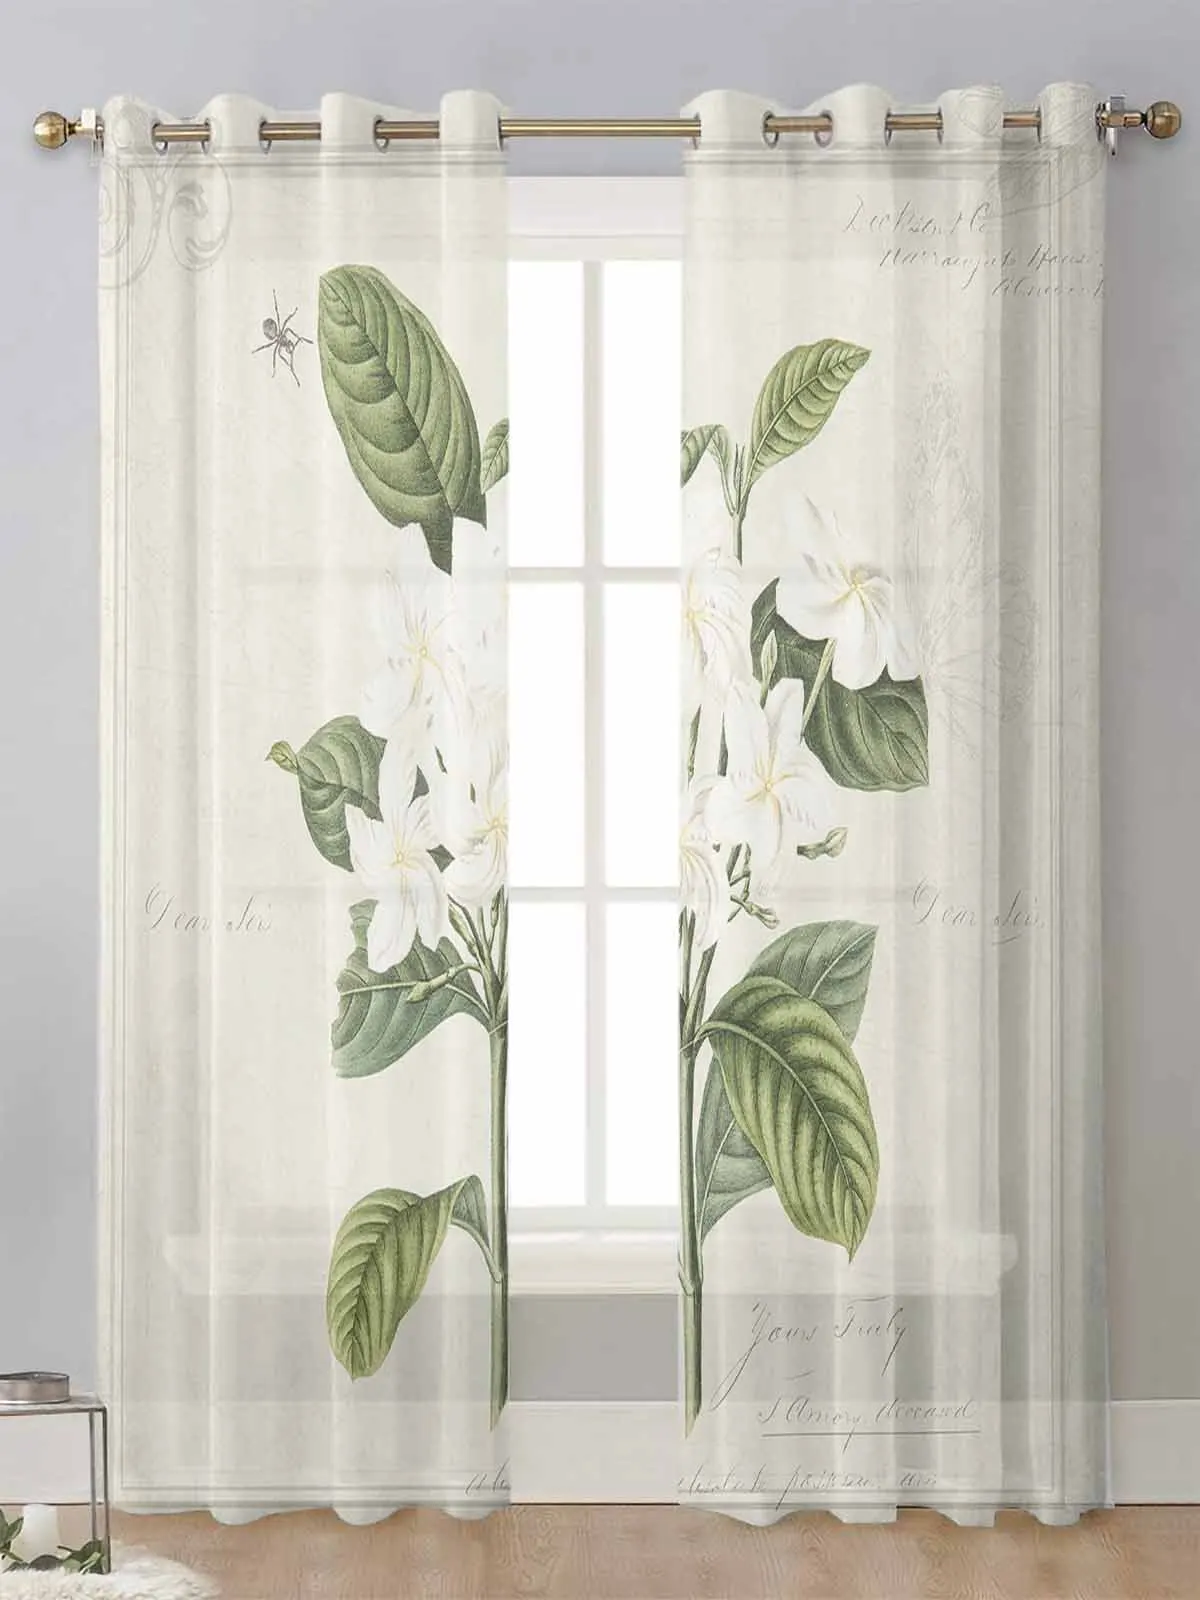 

Vintage Country Plant Plumeria Sheer Curtains For Living Room Window Transparent Voile Tulle Curtain Cortinas Drapes Home Decor